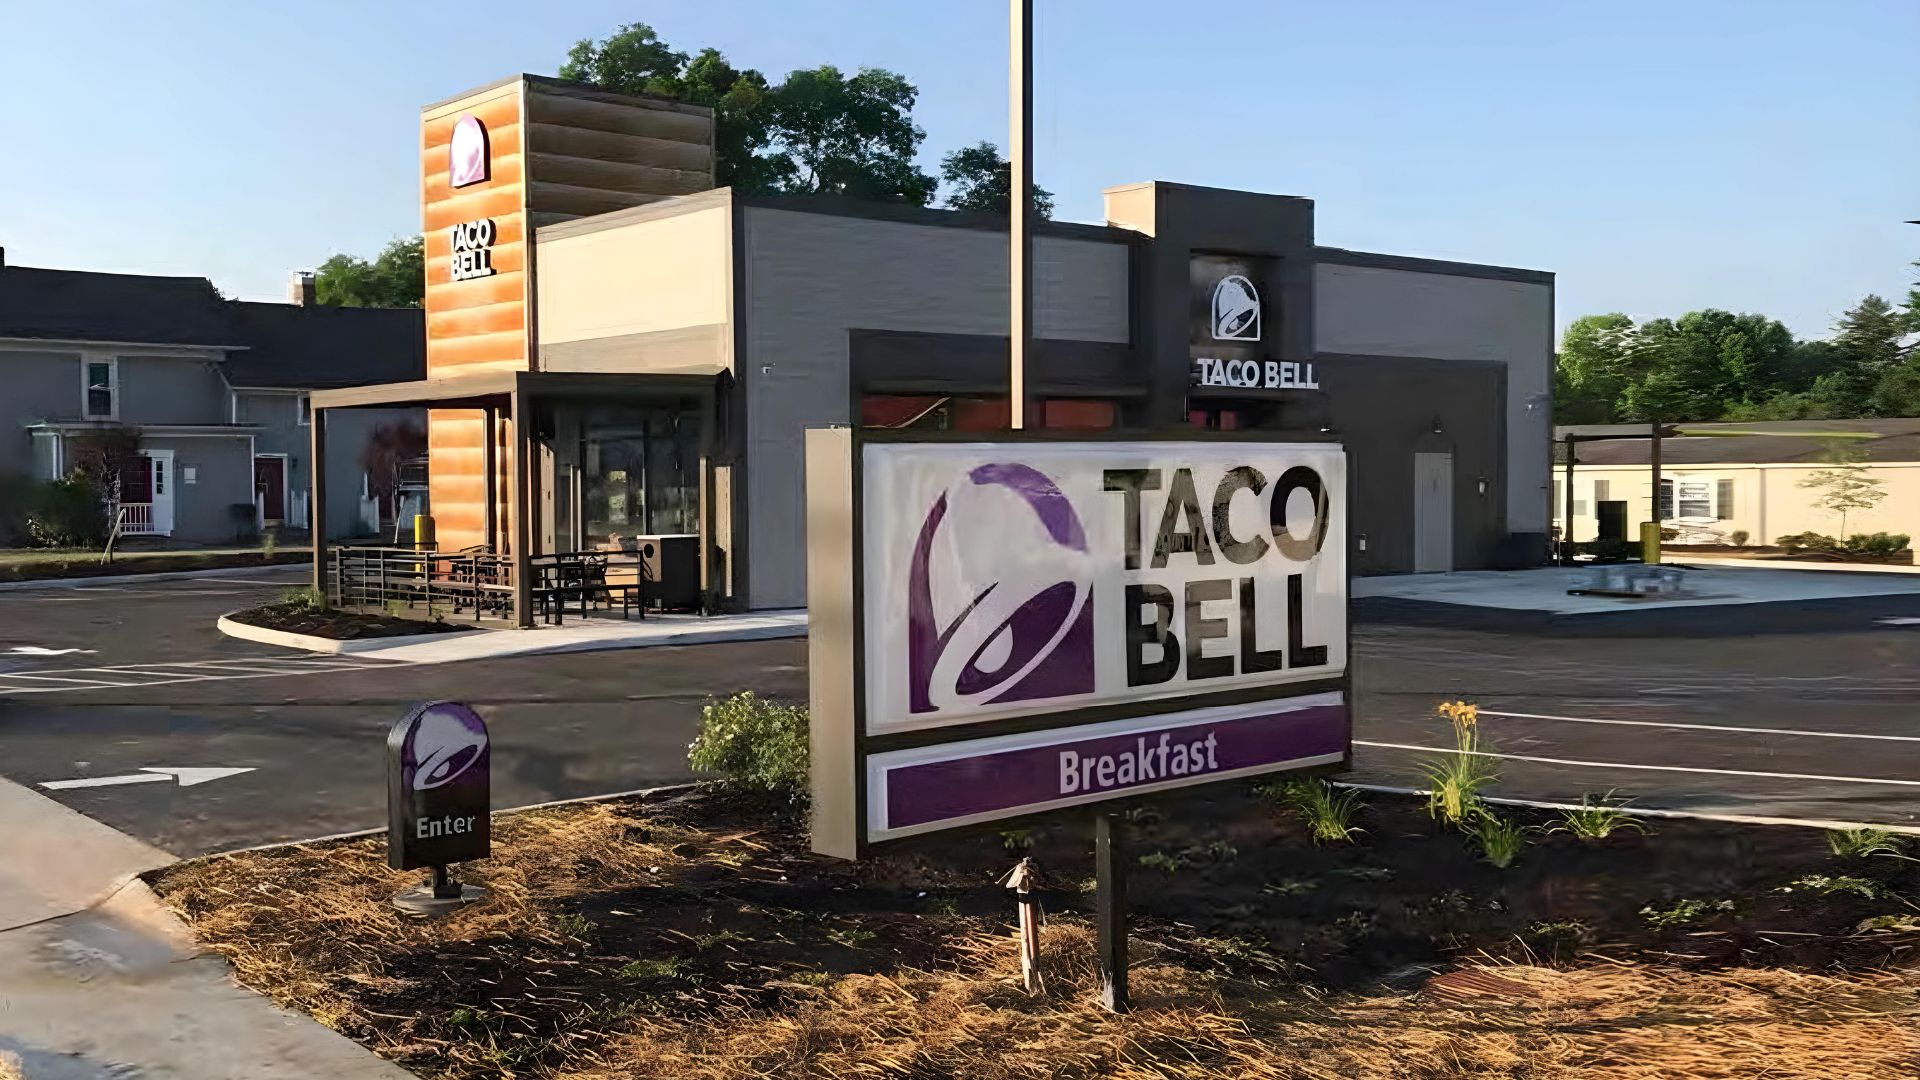 Taco Bell Garrettsville OH Overall Building View and Entrances